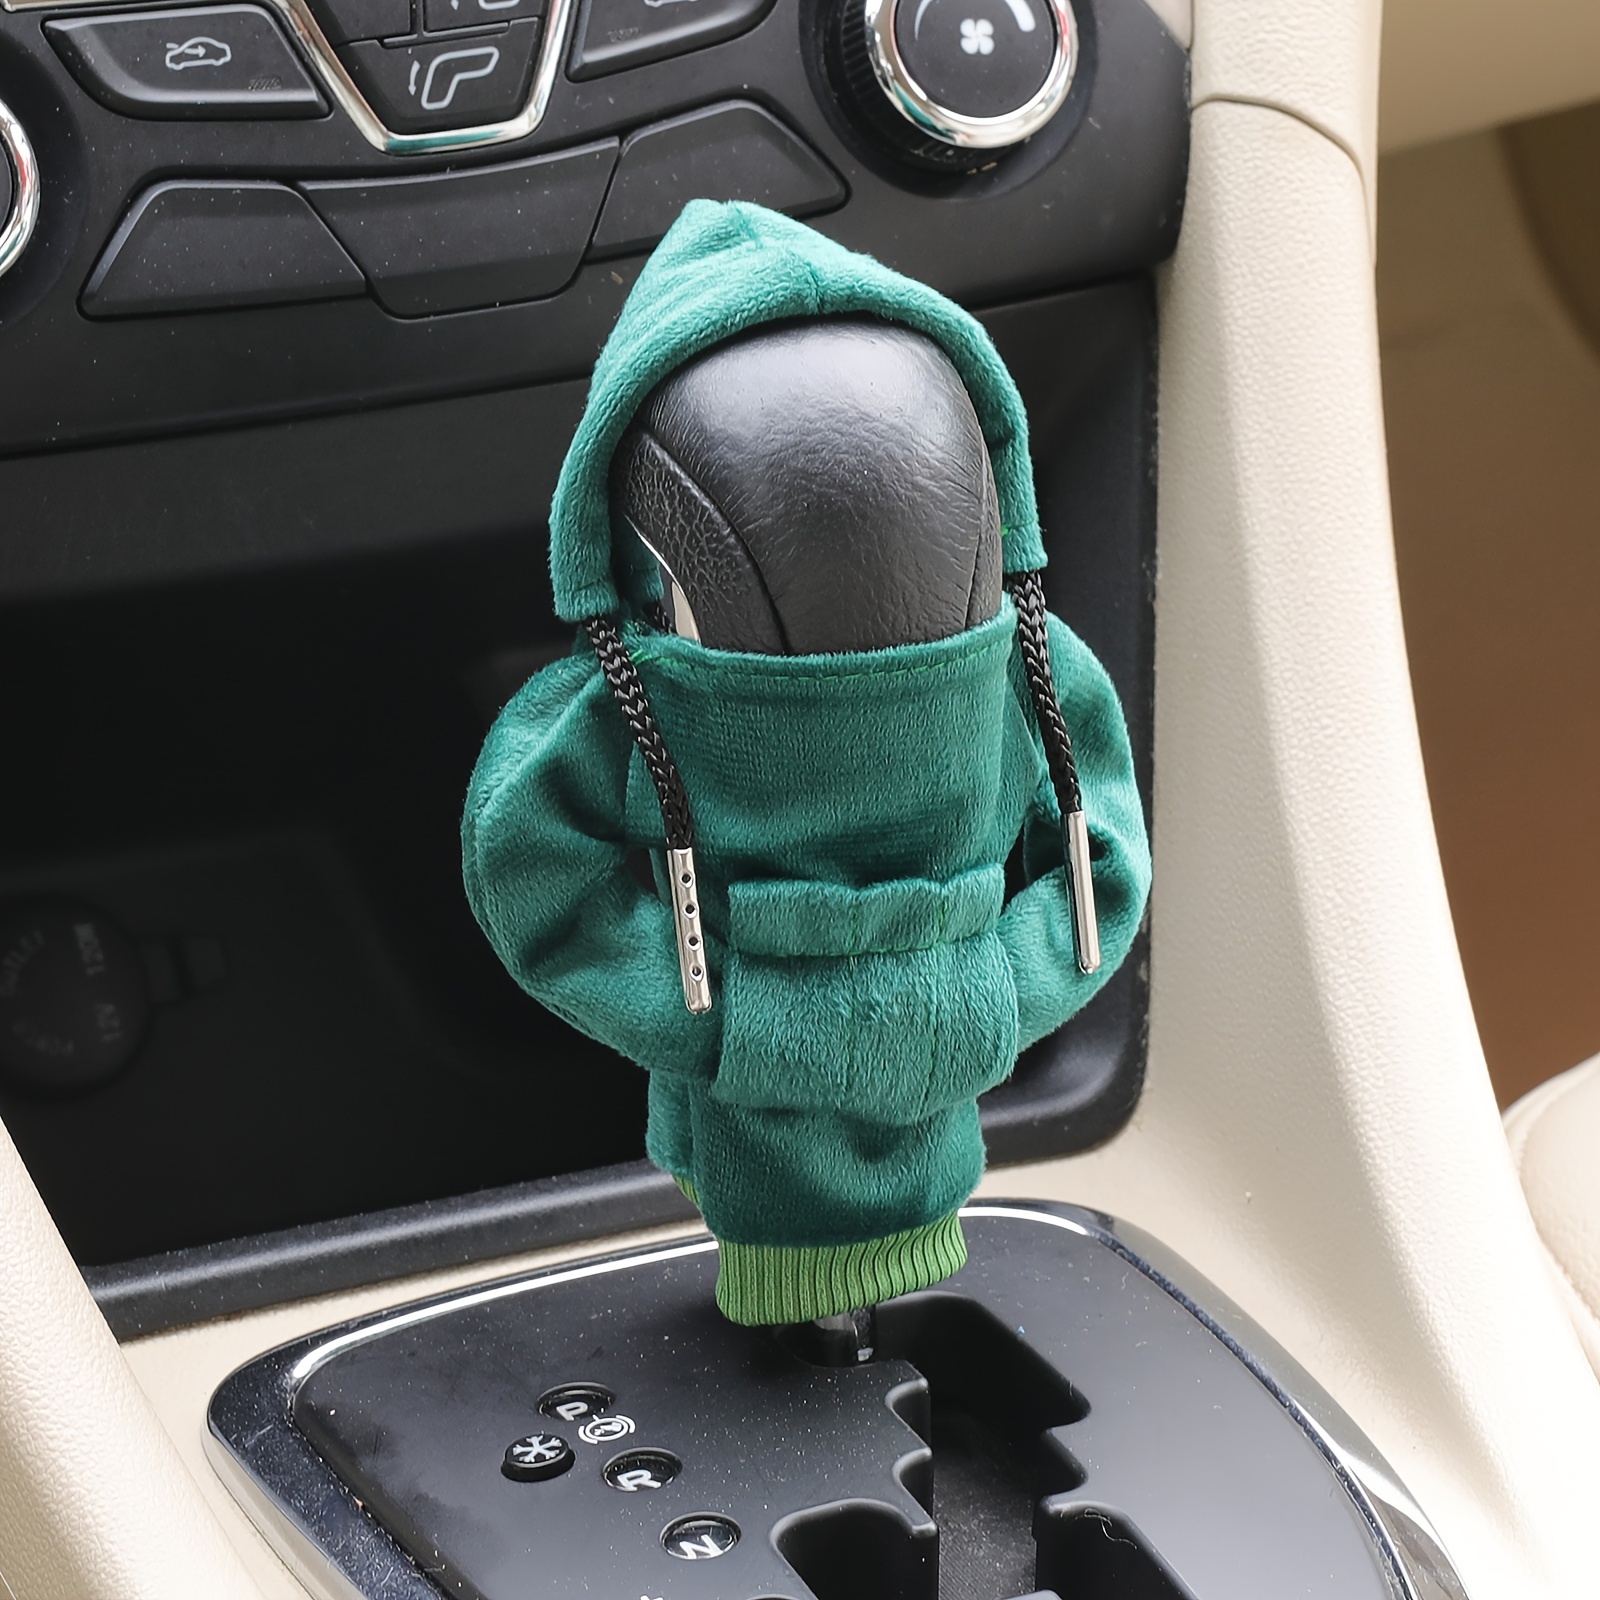 Auto Shifter Knob Cover Fashion Hoodies Gear Shifter for Car Green